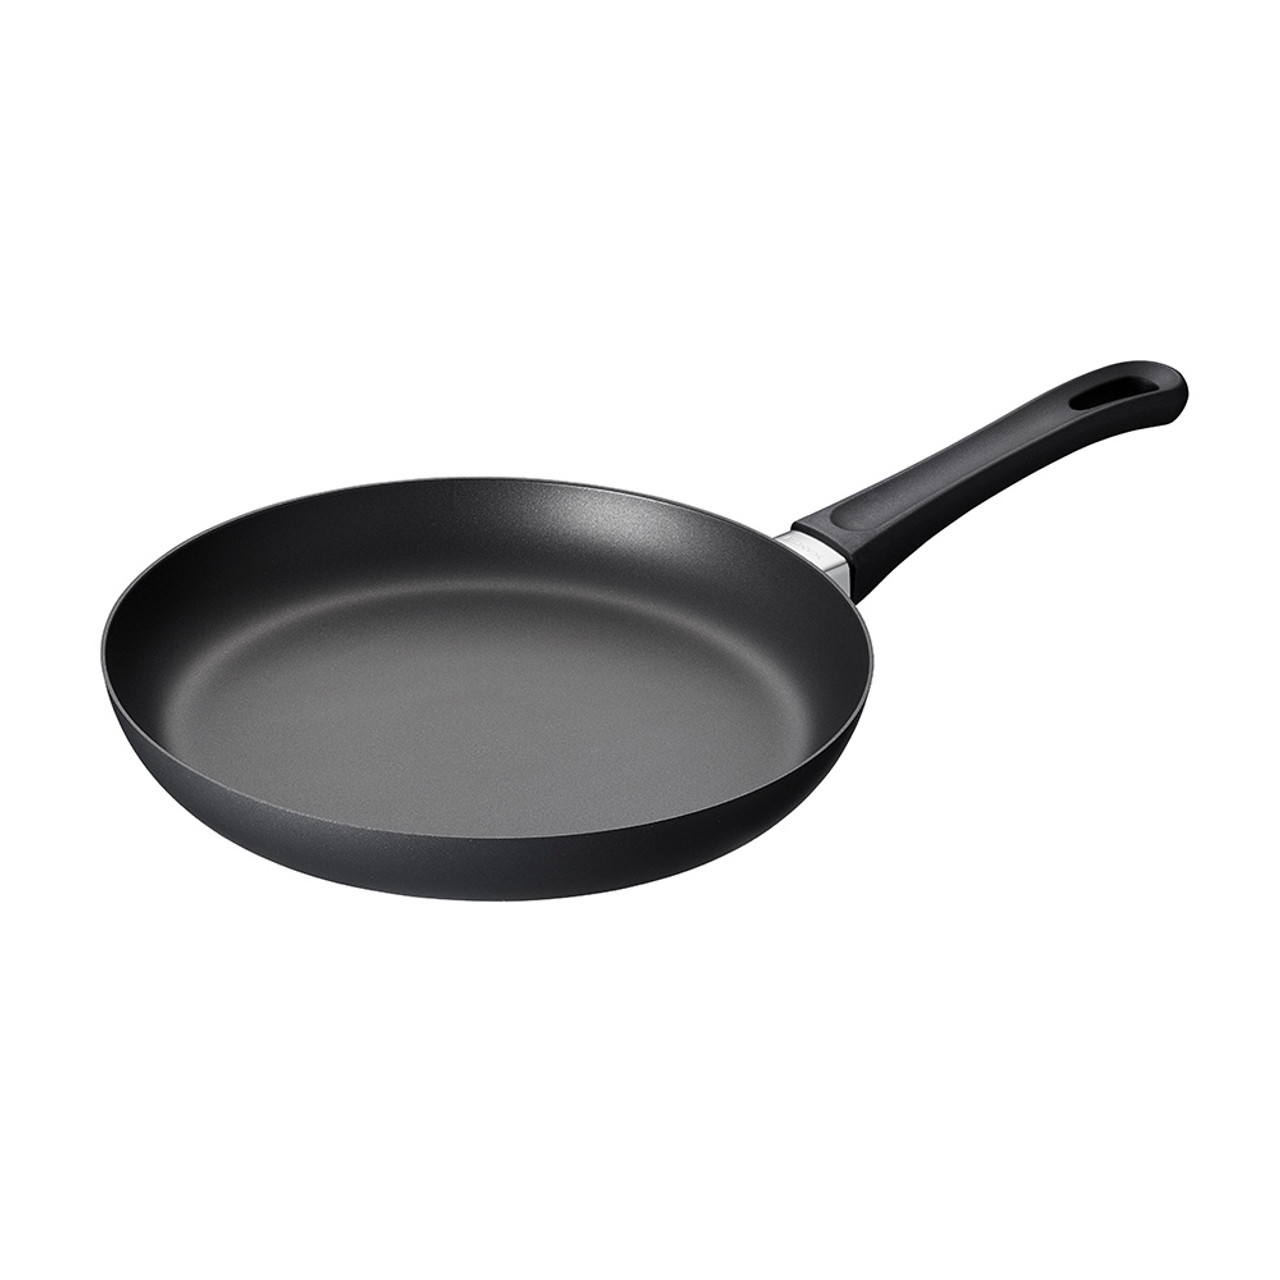 https://cdn11.bigcommerce.com/s-hccytny0od/images/stencil/1280x1280/products/3133/11100/scanpan-classic-induction-fry-pan-10in__20200.1578045155.jpg?c=2?imbypass=on